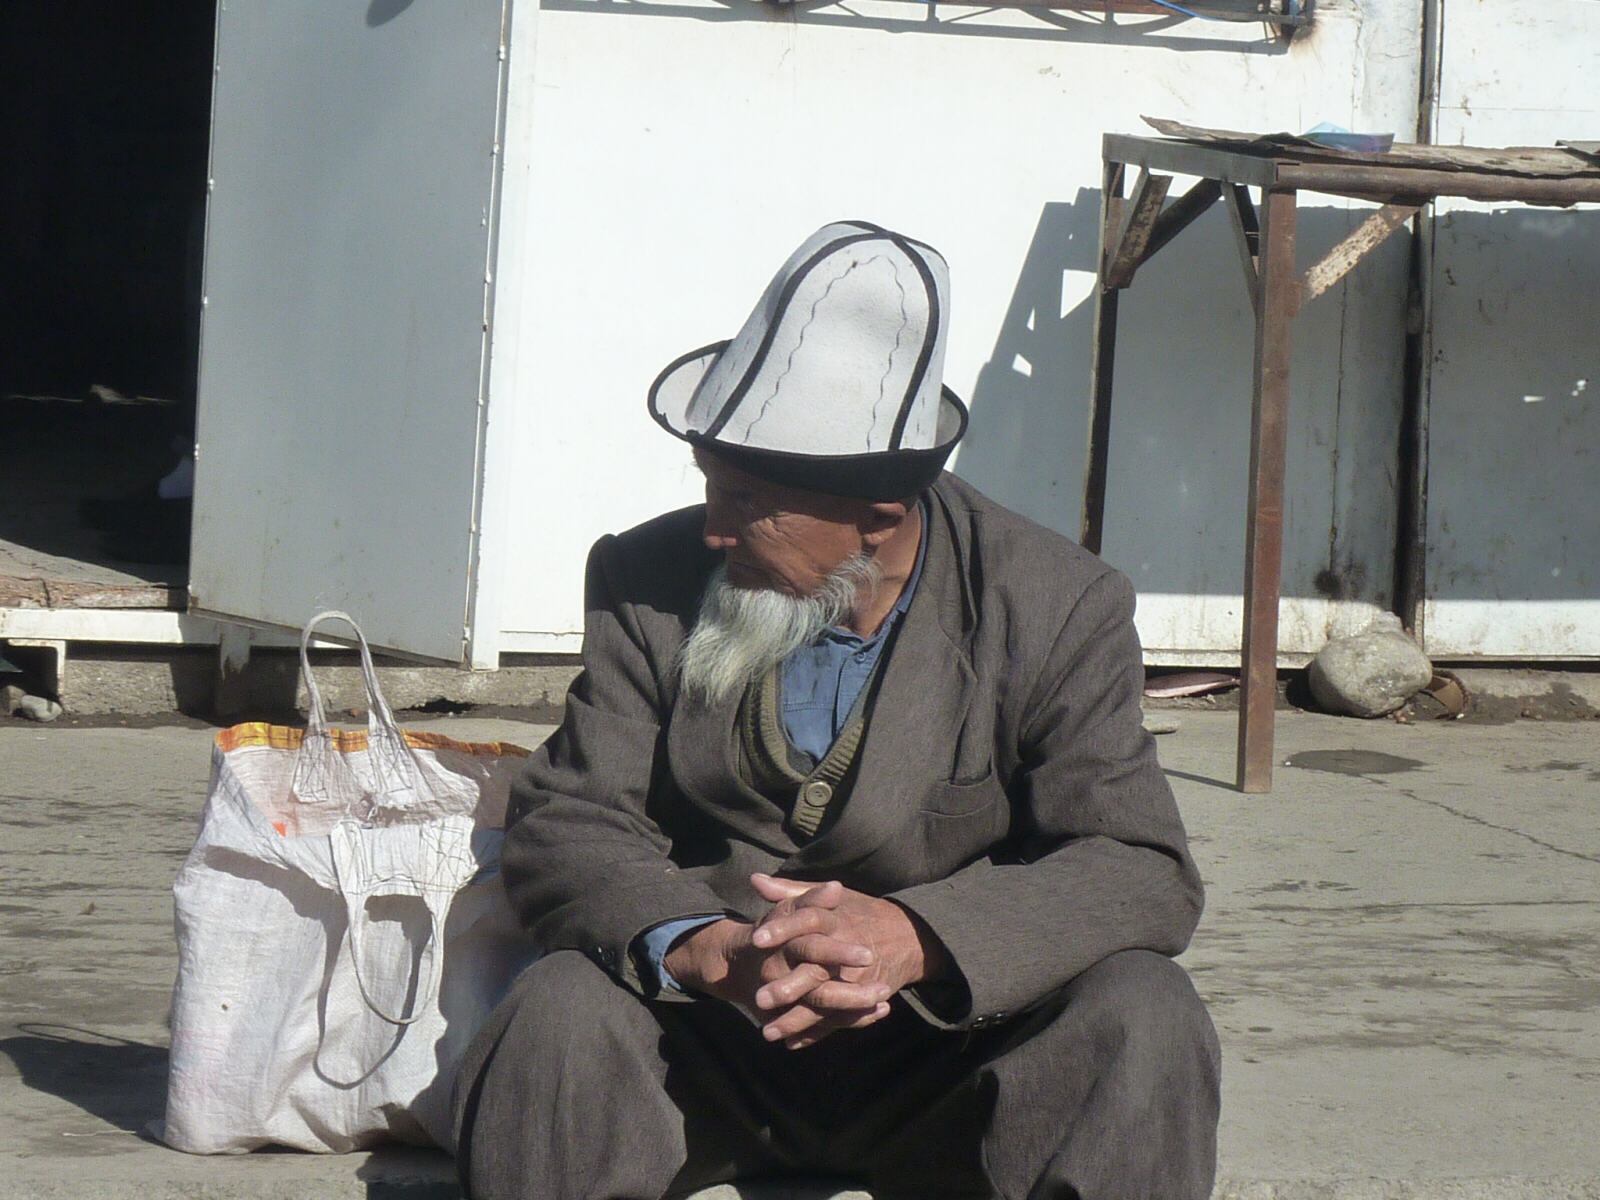 A man with a hat in Osh, Kyrgyzstan